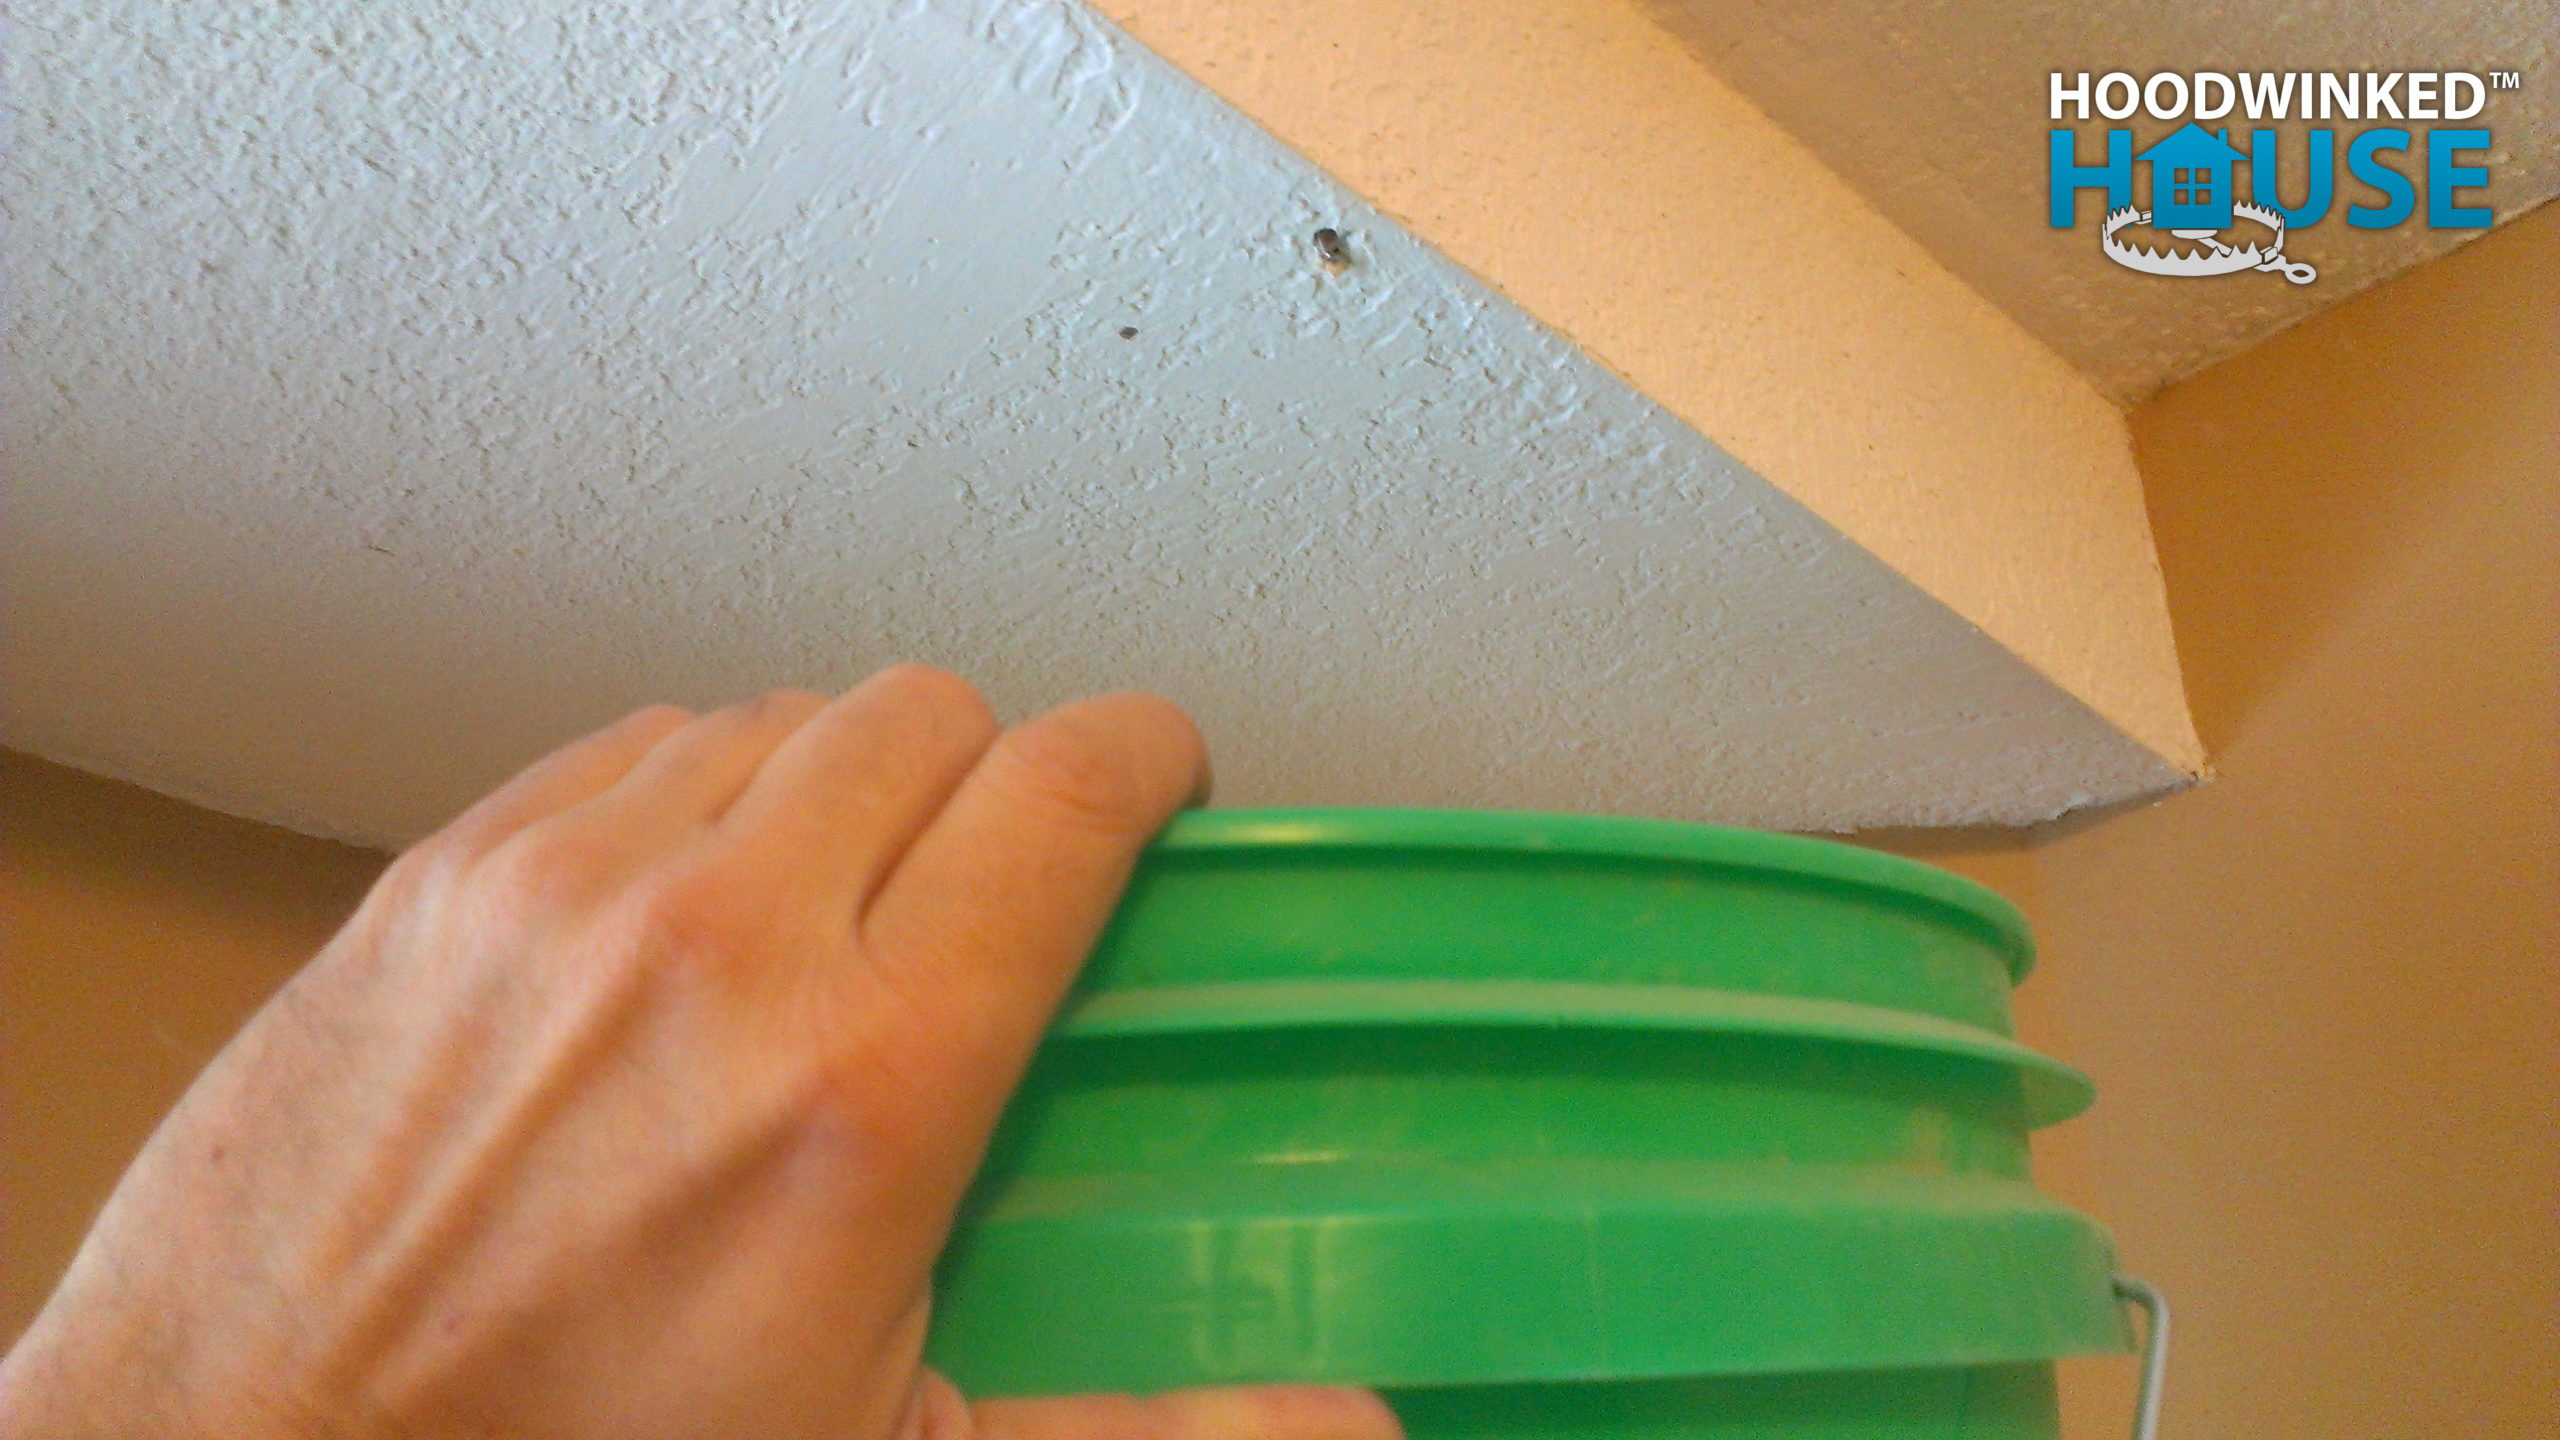 A bucket is held up to a small hole in a ceiling that is leaking water from ice dams.